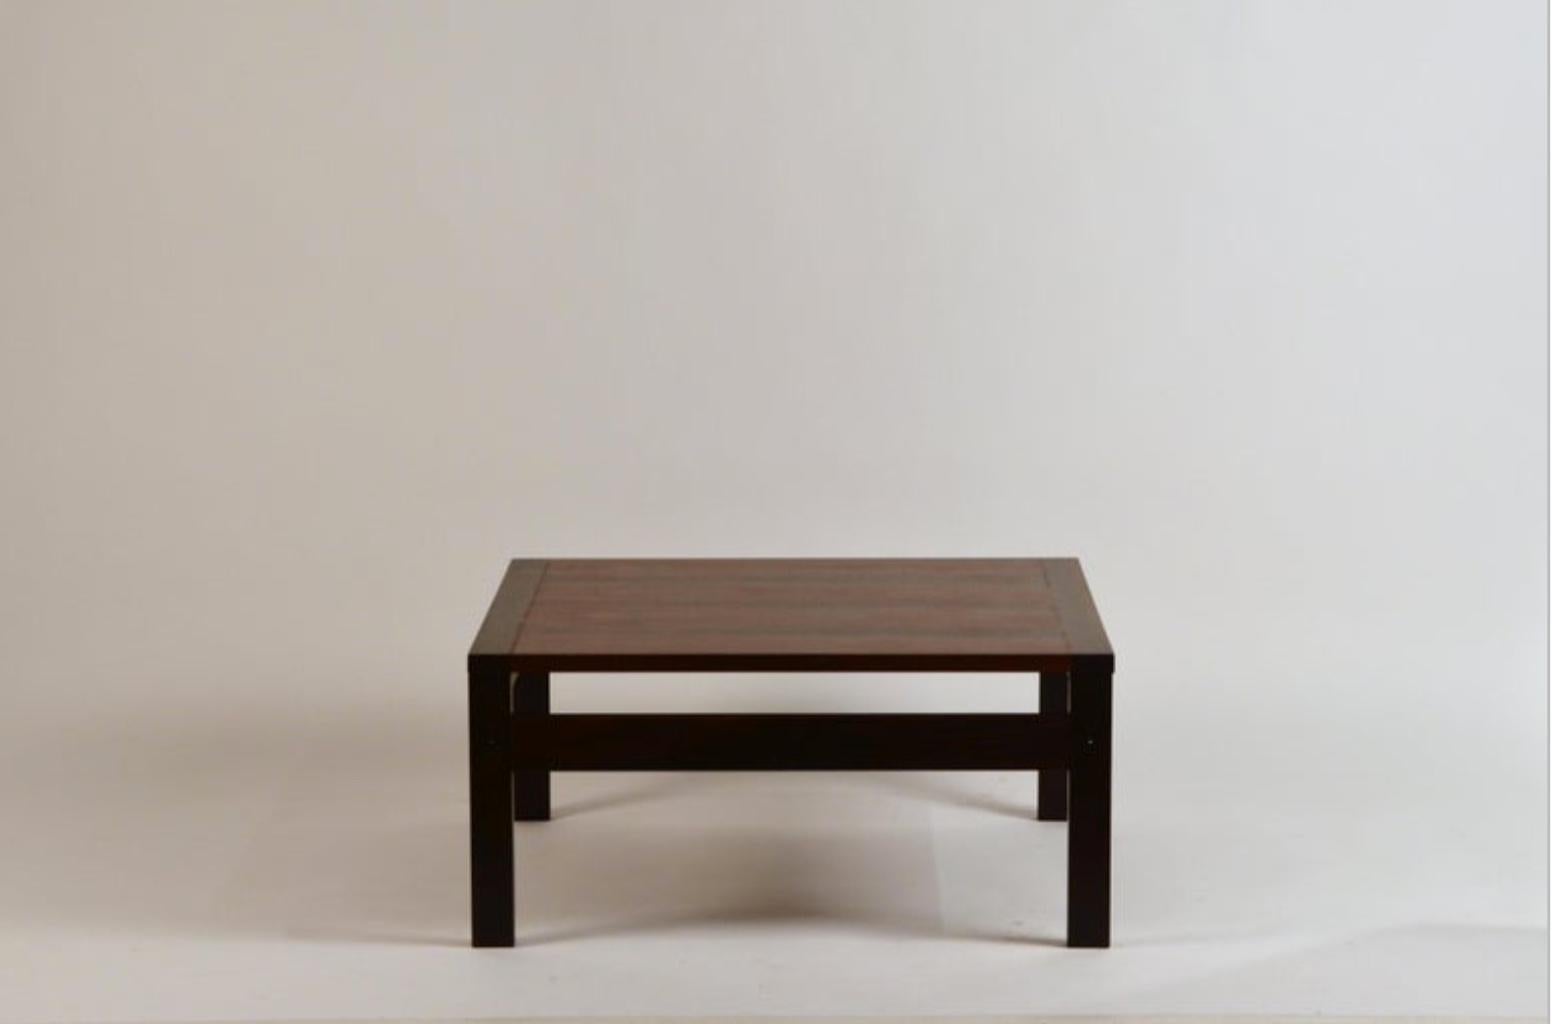 Impeccable rosewood table by Ole Gjerløv-Knudsen and Torben Lind for France & Søn. Beautiful rosewood top over solid rosewood frame. Original France & Søn tag under the top. Made in Denmark.

Can be added to other matching elements (seating